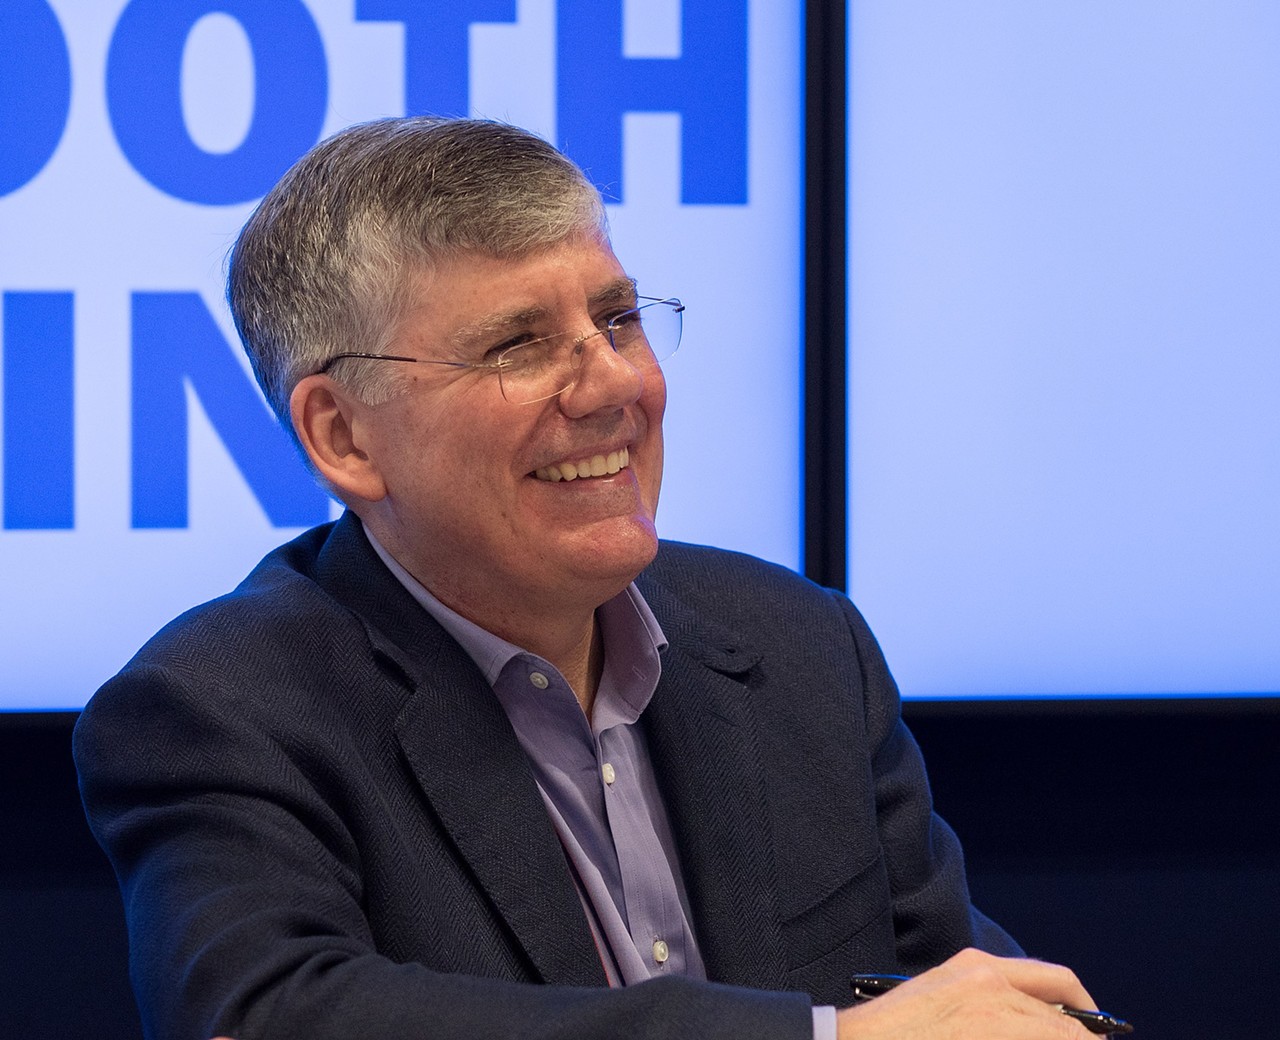 Rick Riordan
You may know Rick Riordan for his Percy Jackson and the Olympians book series, but did you know the author's a tried and true San Antonian? Born and raised in the Alamo City, Riordan went to Alamo Heights High School before heading to college at North Texas State University (now UNT). He transferred to UT Austin to study English and History, then came back to San Antonio and nabbed a teaching certification at UTSA.
Photo via Wikimedia Commons / Rhododendrites